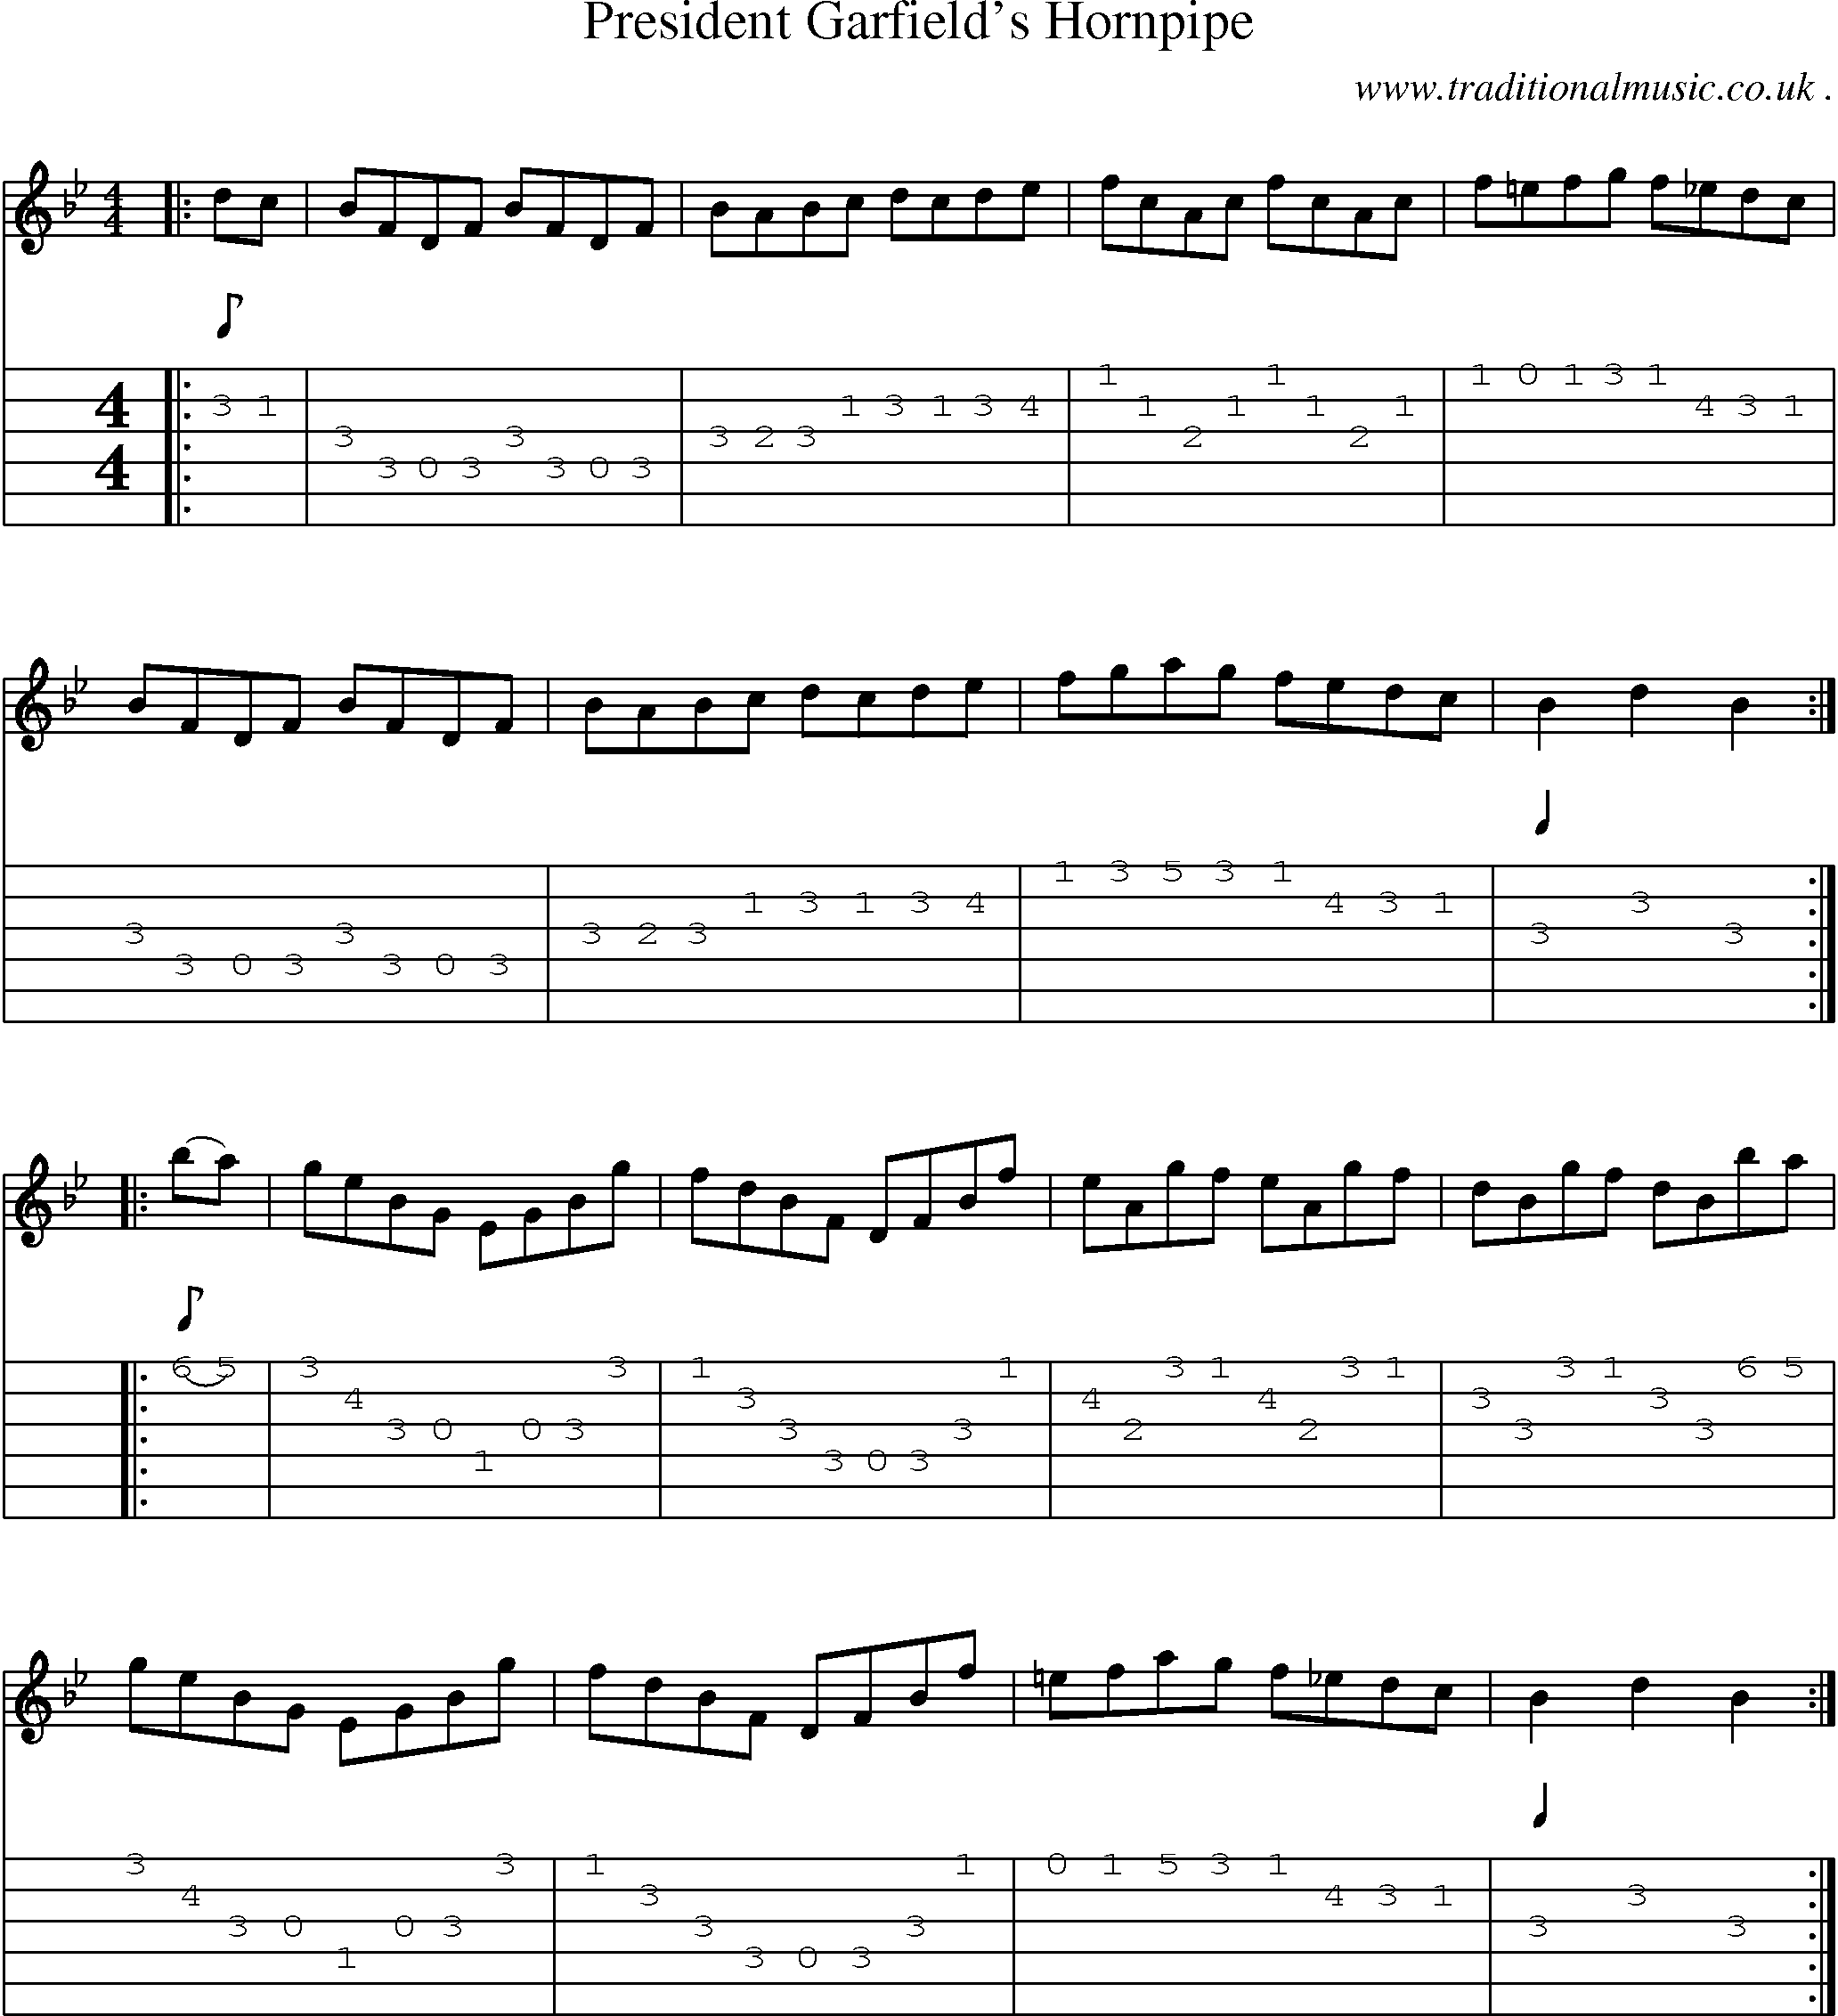 Sheet-Music and Guitar Tabs for President Garfields Hornpipe